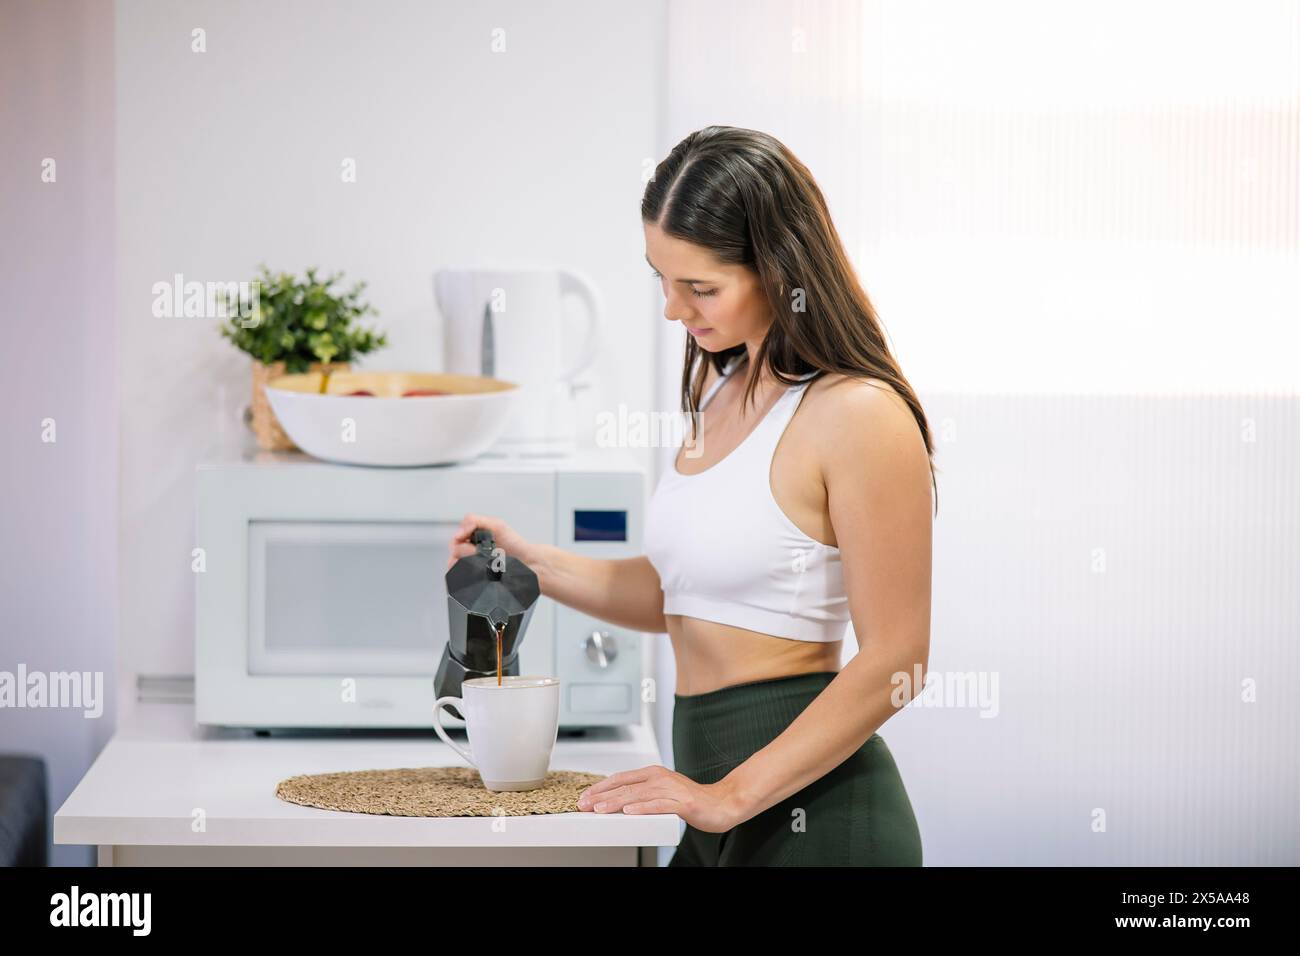 A fit woman in athletic wear pours coffee from a moka pot into a mug in her well-lit home kitchen, exemplifying a healthy lifestyle Stock Photo